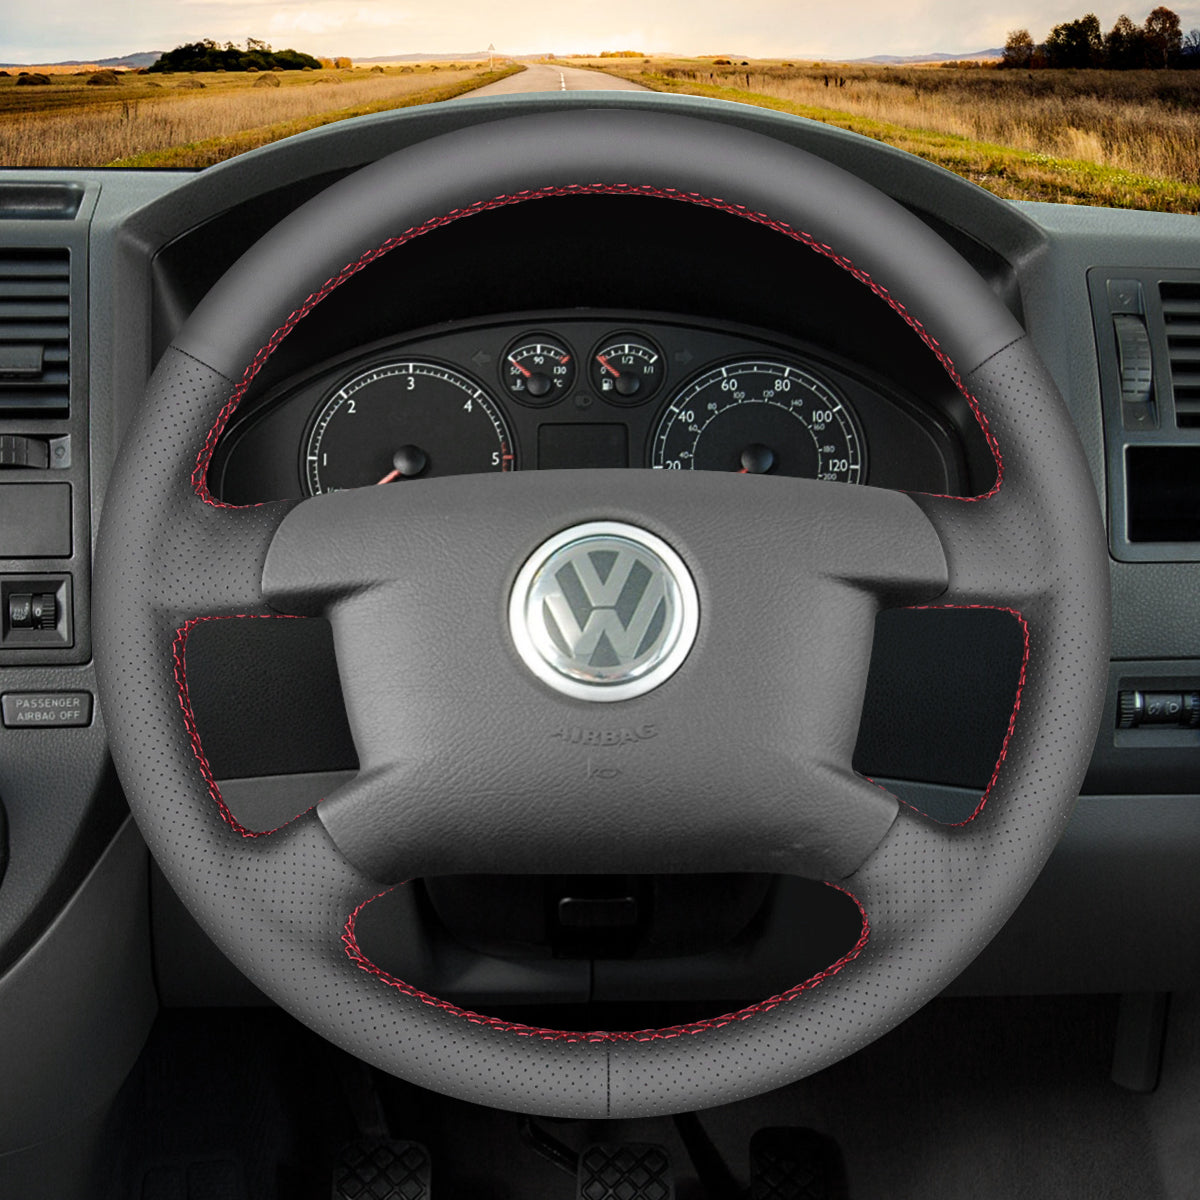 MEWANT Hand Stitch Black Leather Car Steering Wheel Cover for Volkswagen VW Caddy 2003-2006 / Caravelle 2003-2009 / T5 2003-2008